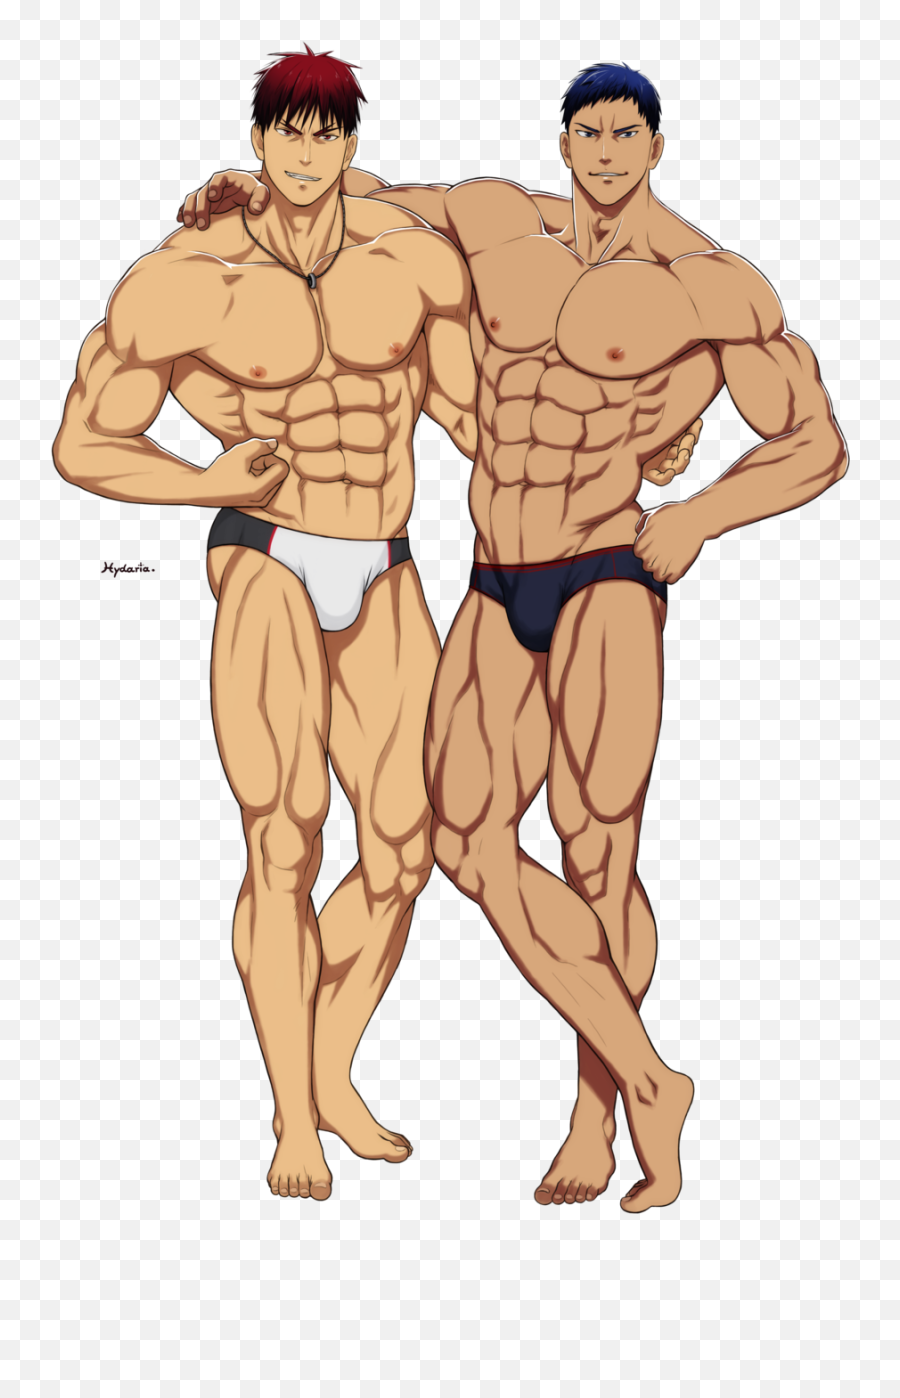 Hydaria - Muscular Man Drawing Anime Png,Muscle Man Png